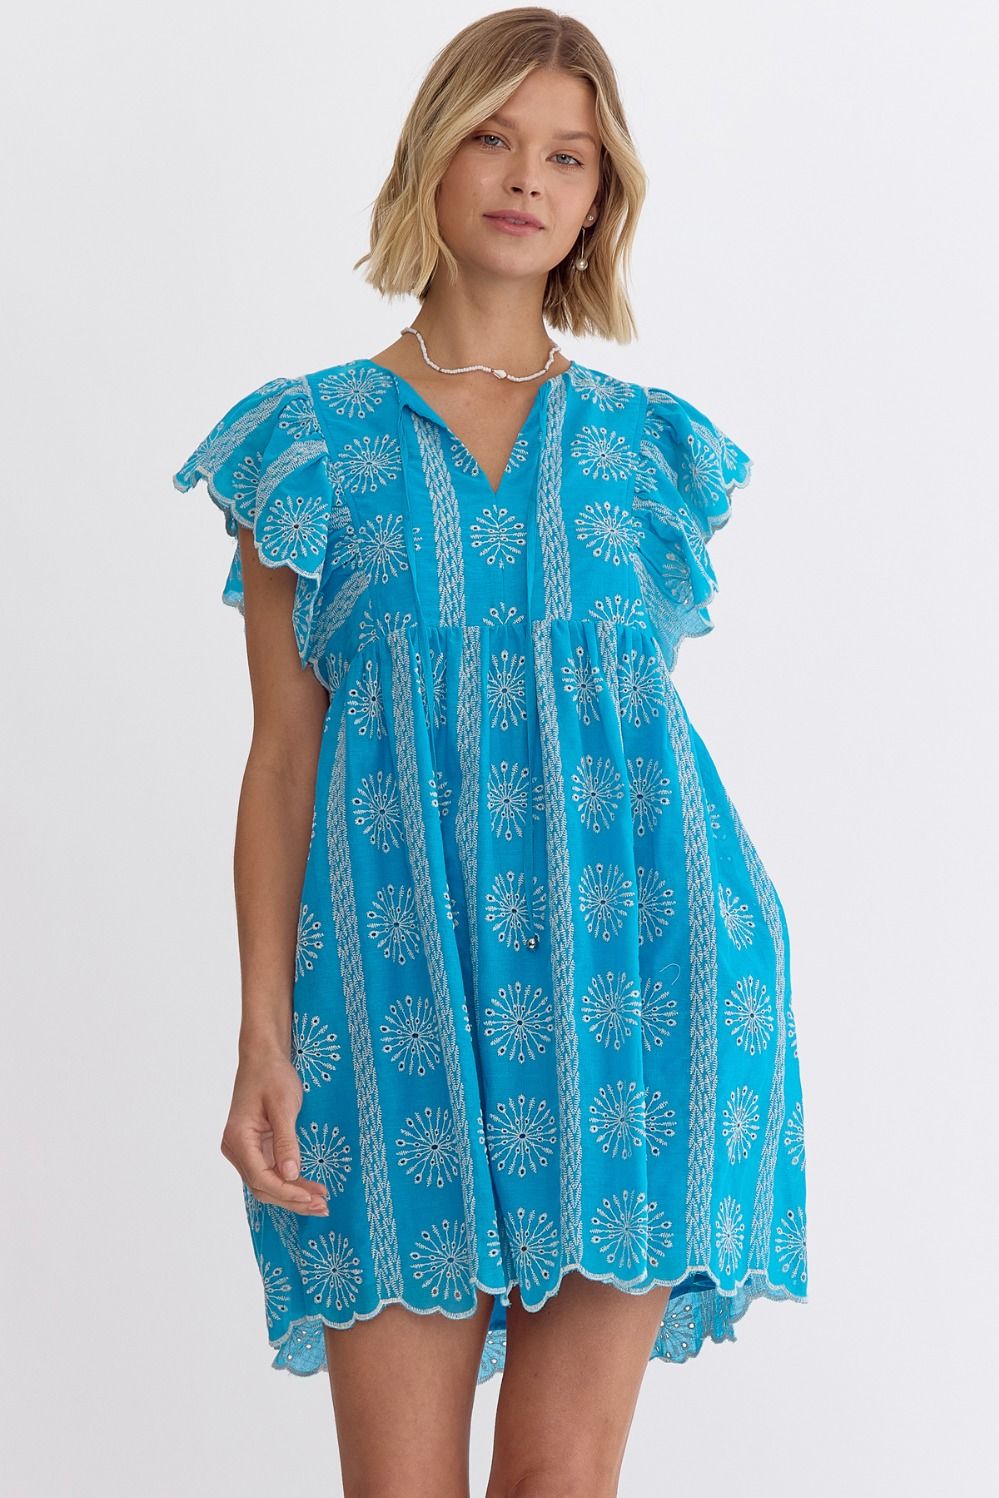 Entro Blue floral embroidered babydoll dress 